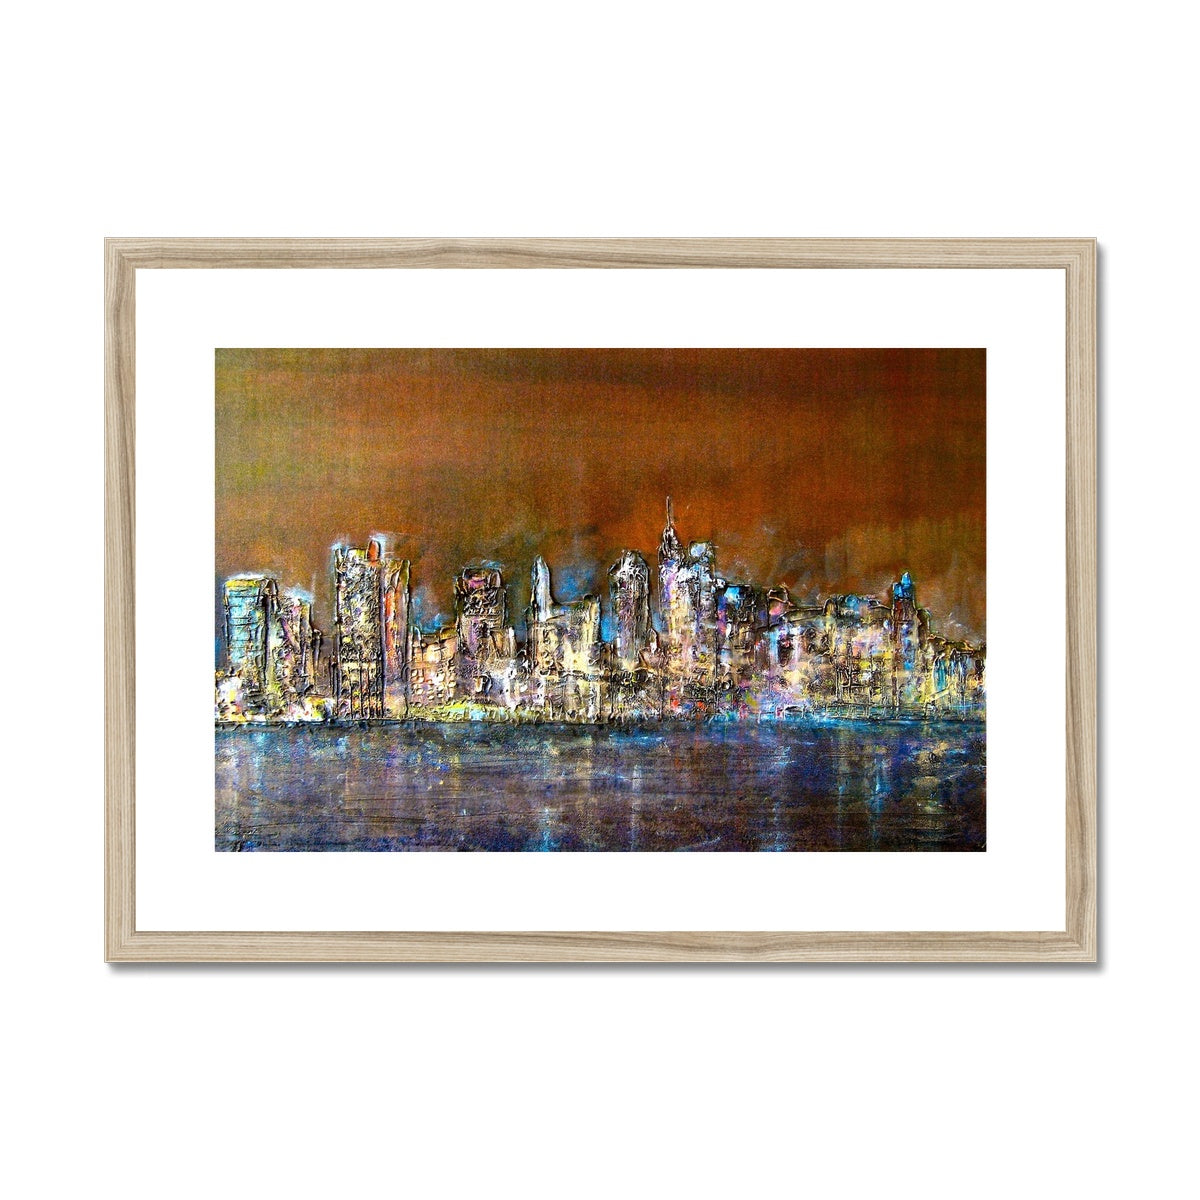 Manhattan Nights Painting | Framed & Mounted Prints From Scotland-Framed & Mounted Prints-World Art Gallery-A2 Landscape-Natural Frame-Paintings, Prints, Homeware, Art Gifts From Scotland By Scottish Artist Kevin Hunter